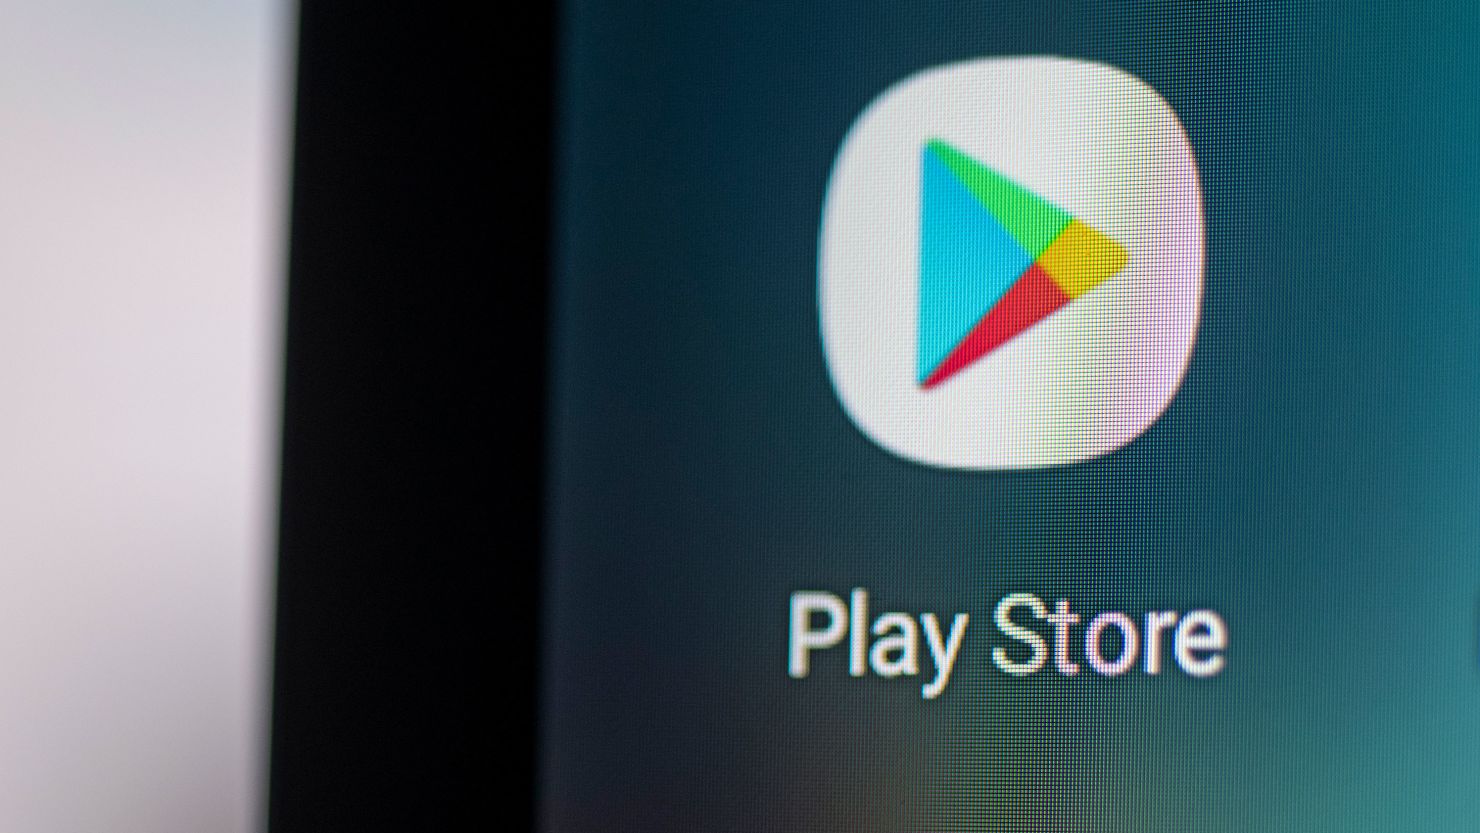 Google Announces Play Store Changes to Help Promote Great Games